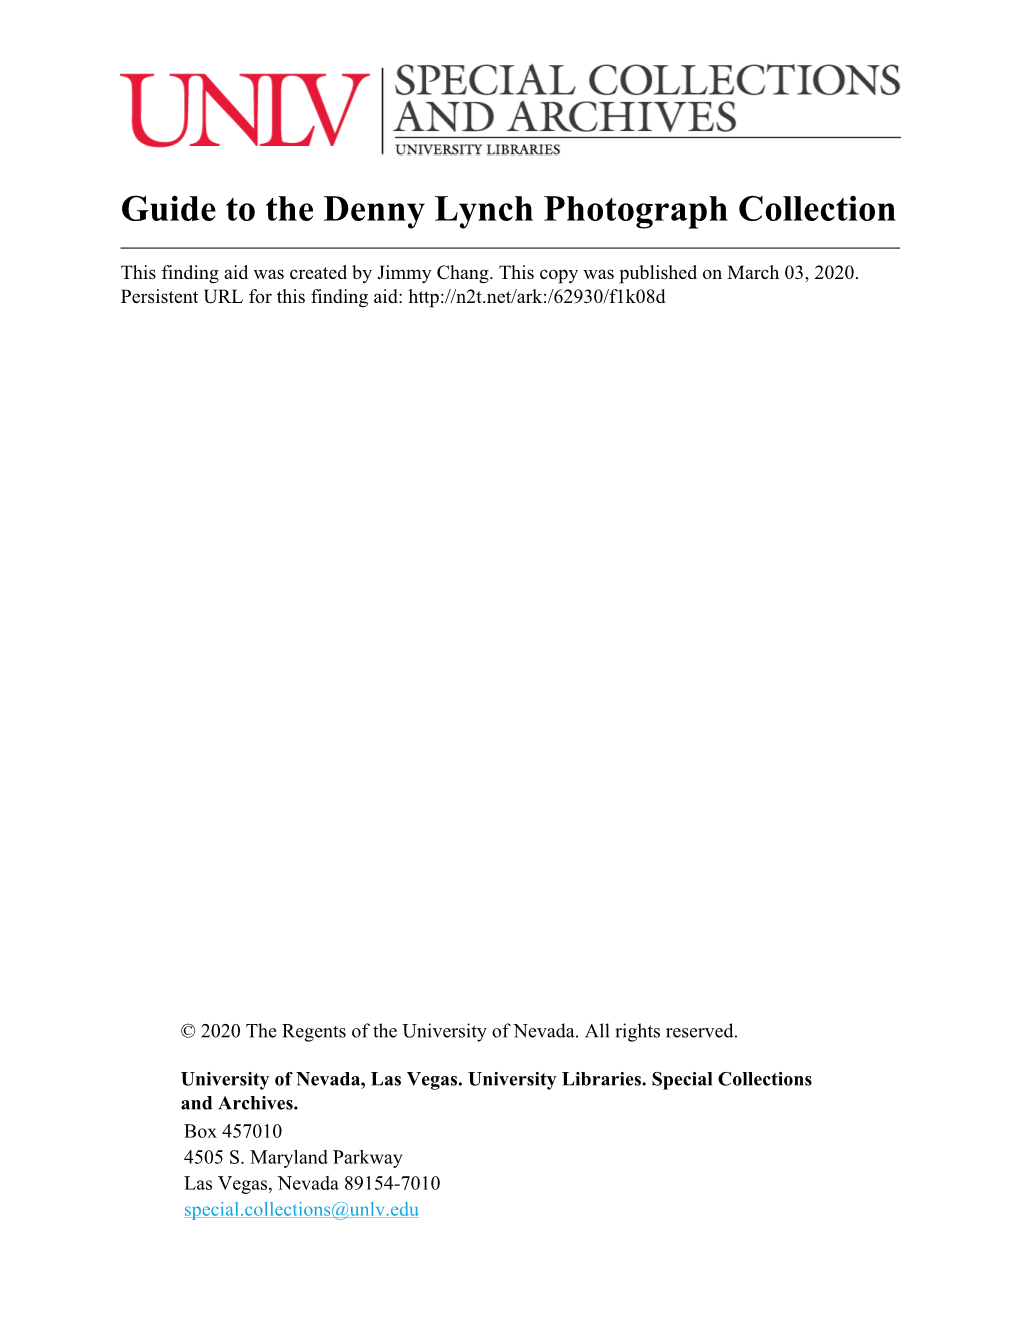 Guide to the Denny Lynch Photograph Collection